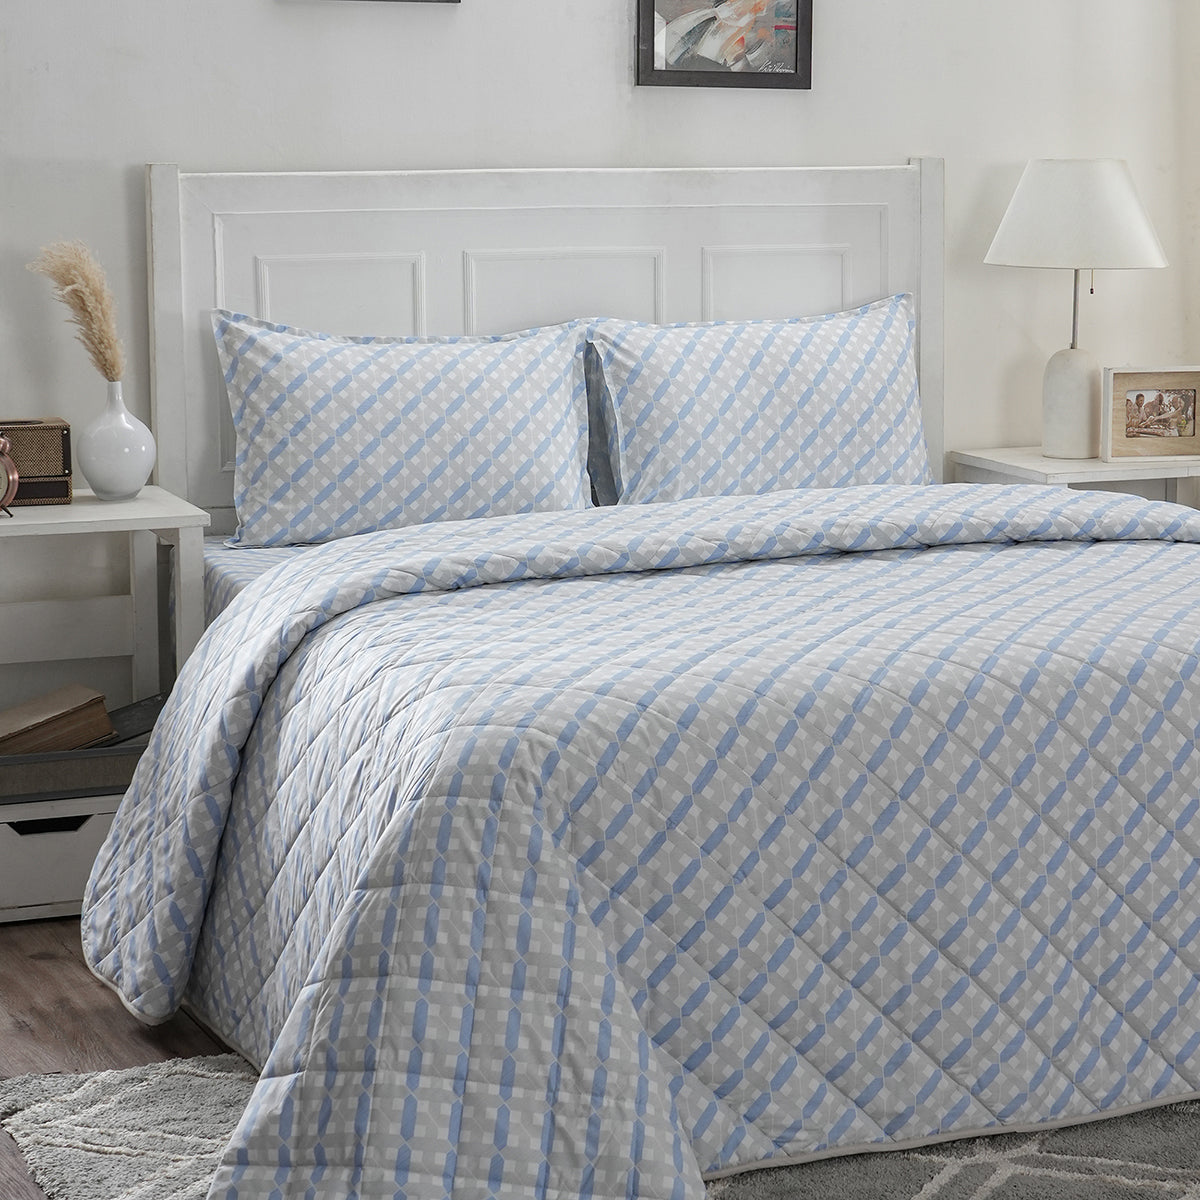 Optimist Bloom Esther 4PC Quilt/Quilted Bed Cover Set